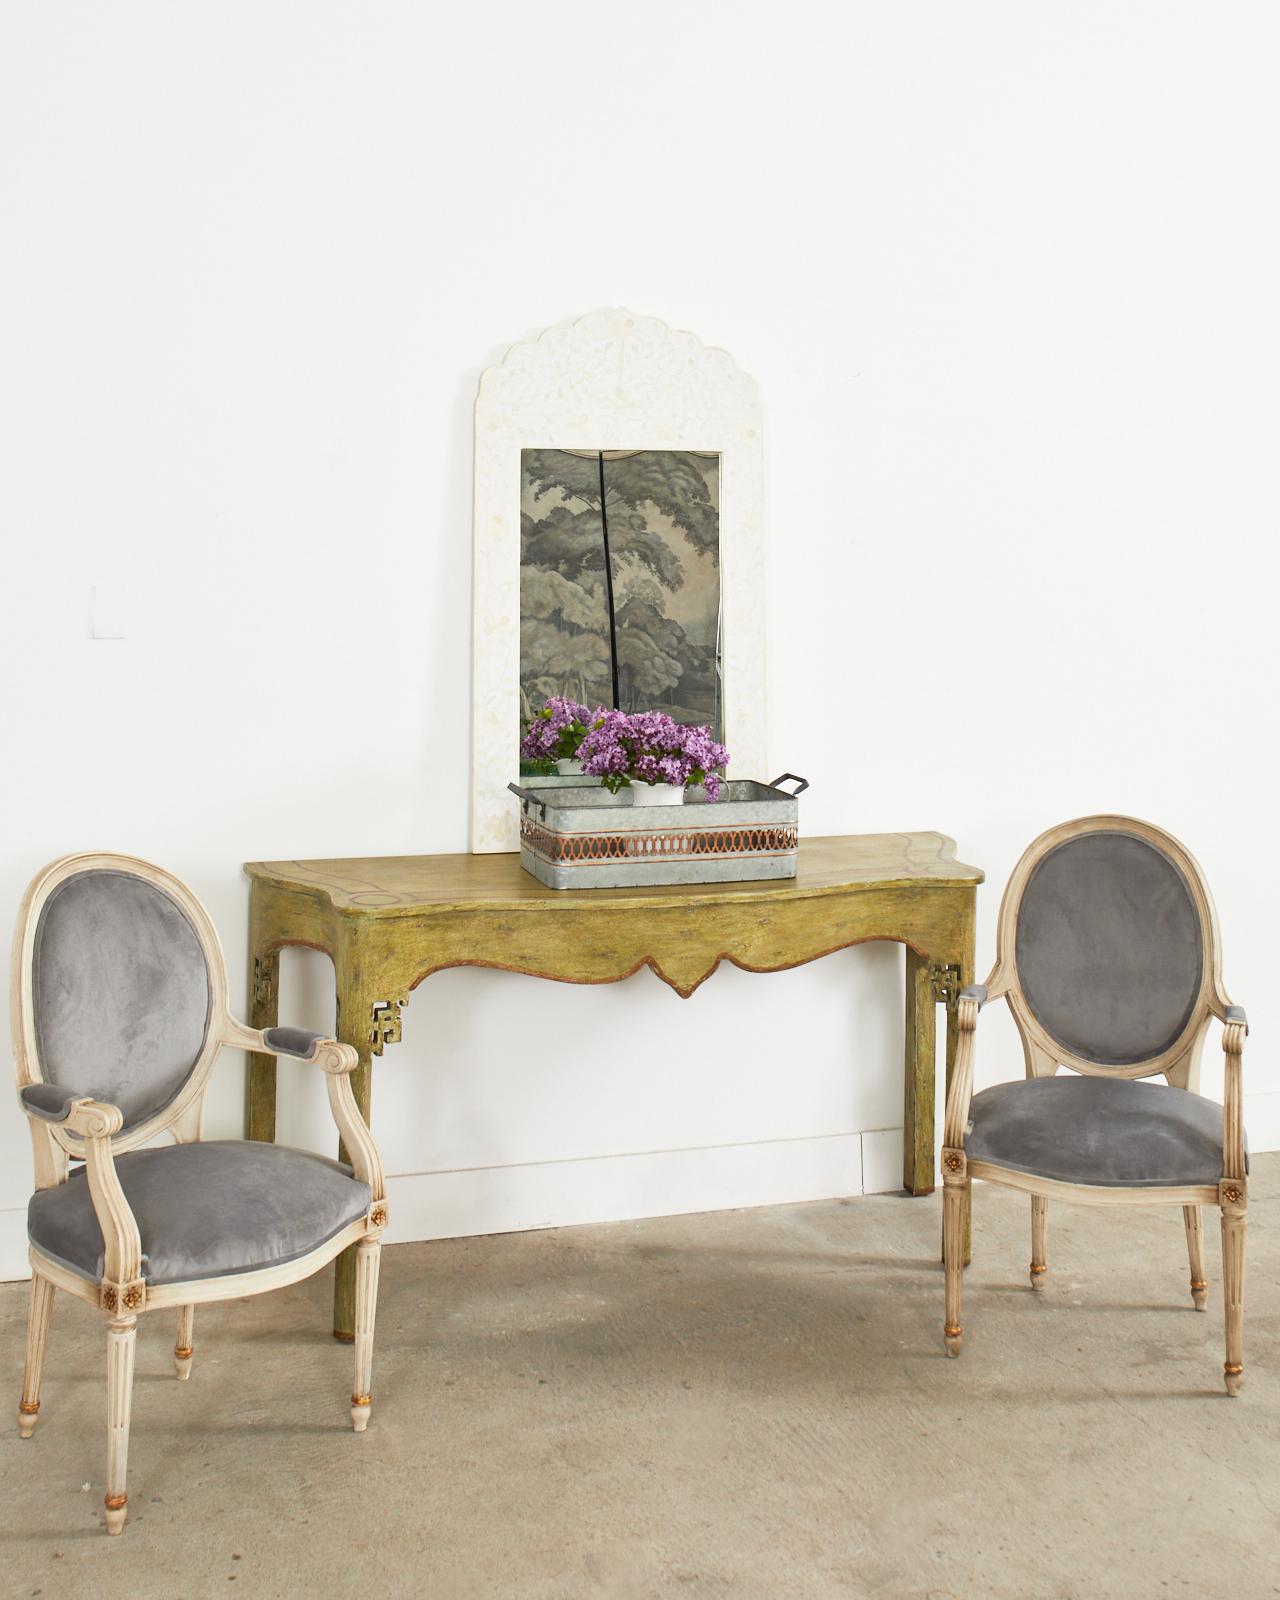 Grand lacquered console table featuring an aged, intentionally distressed patina by Minton-Spidell artisans in Los Angeles, CA. The large table is crafted from a thick, solid plank having a serpentine shaped case. The apron is decorated with Asian